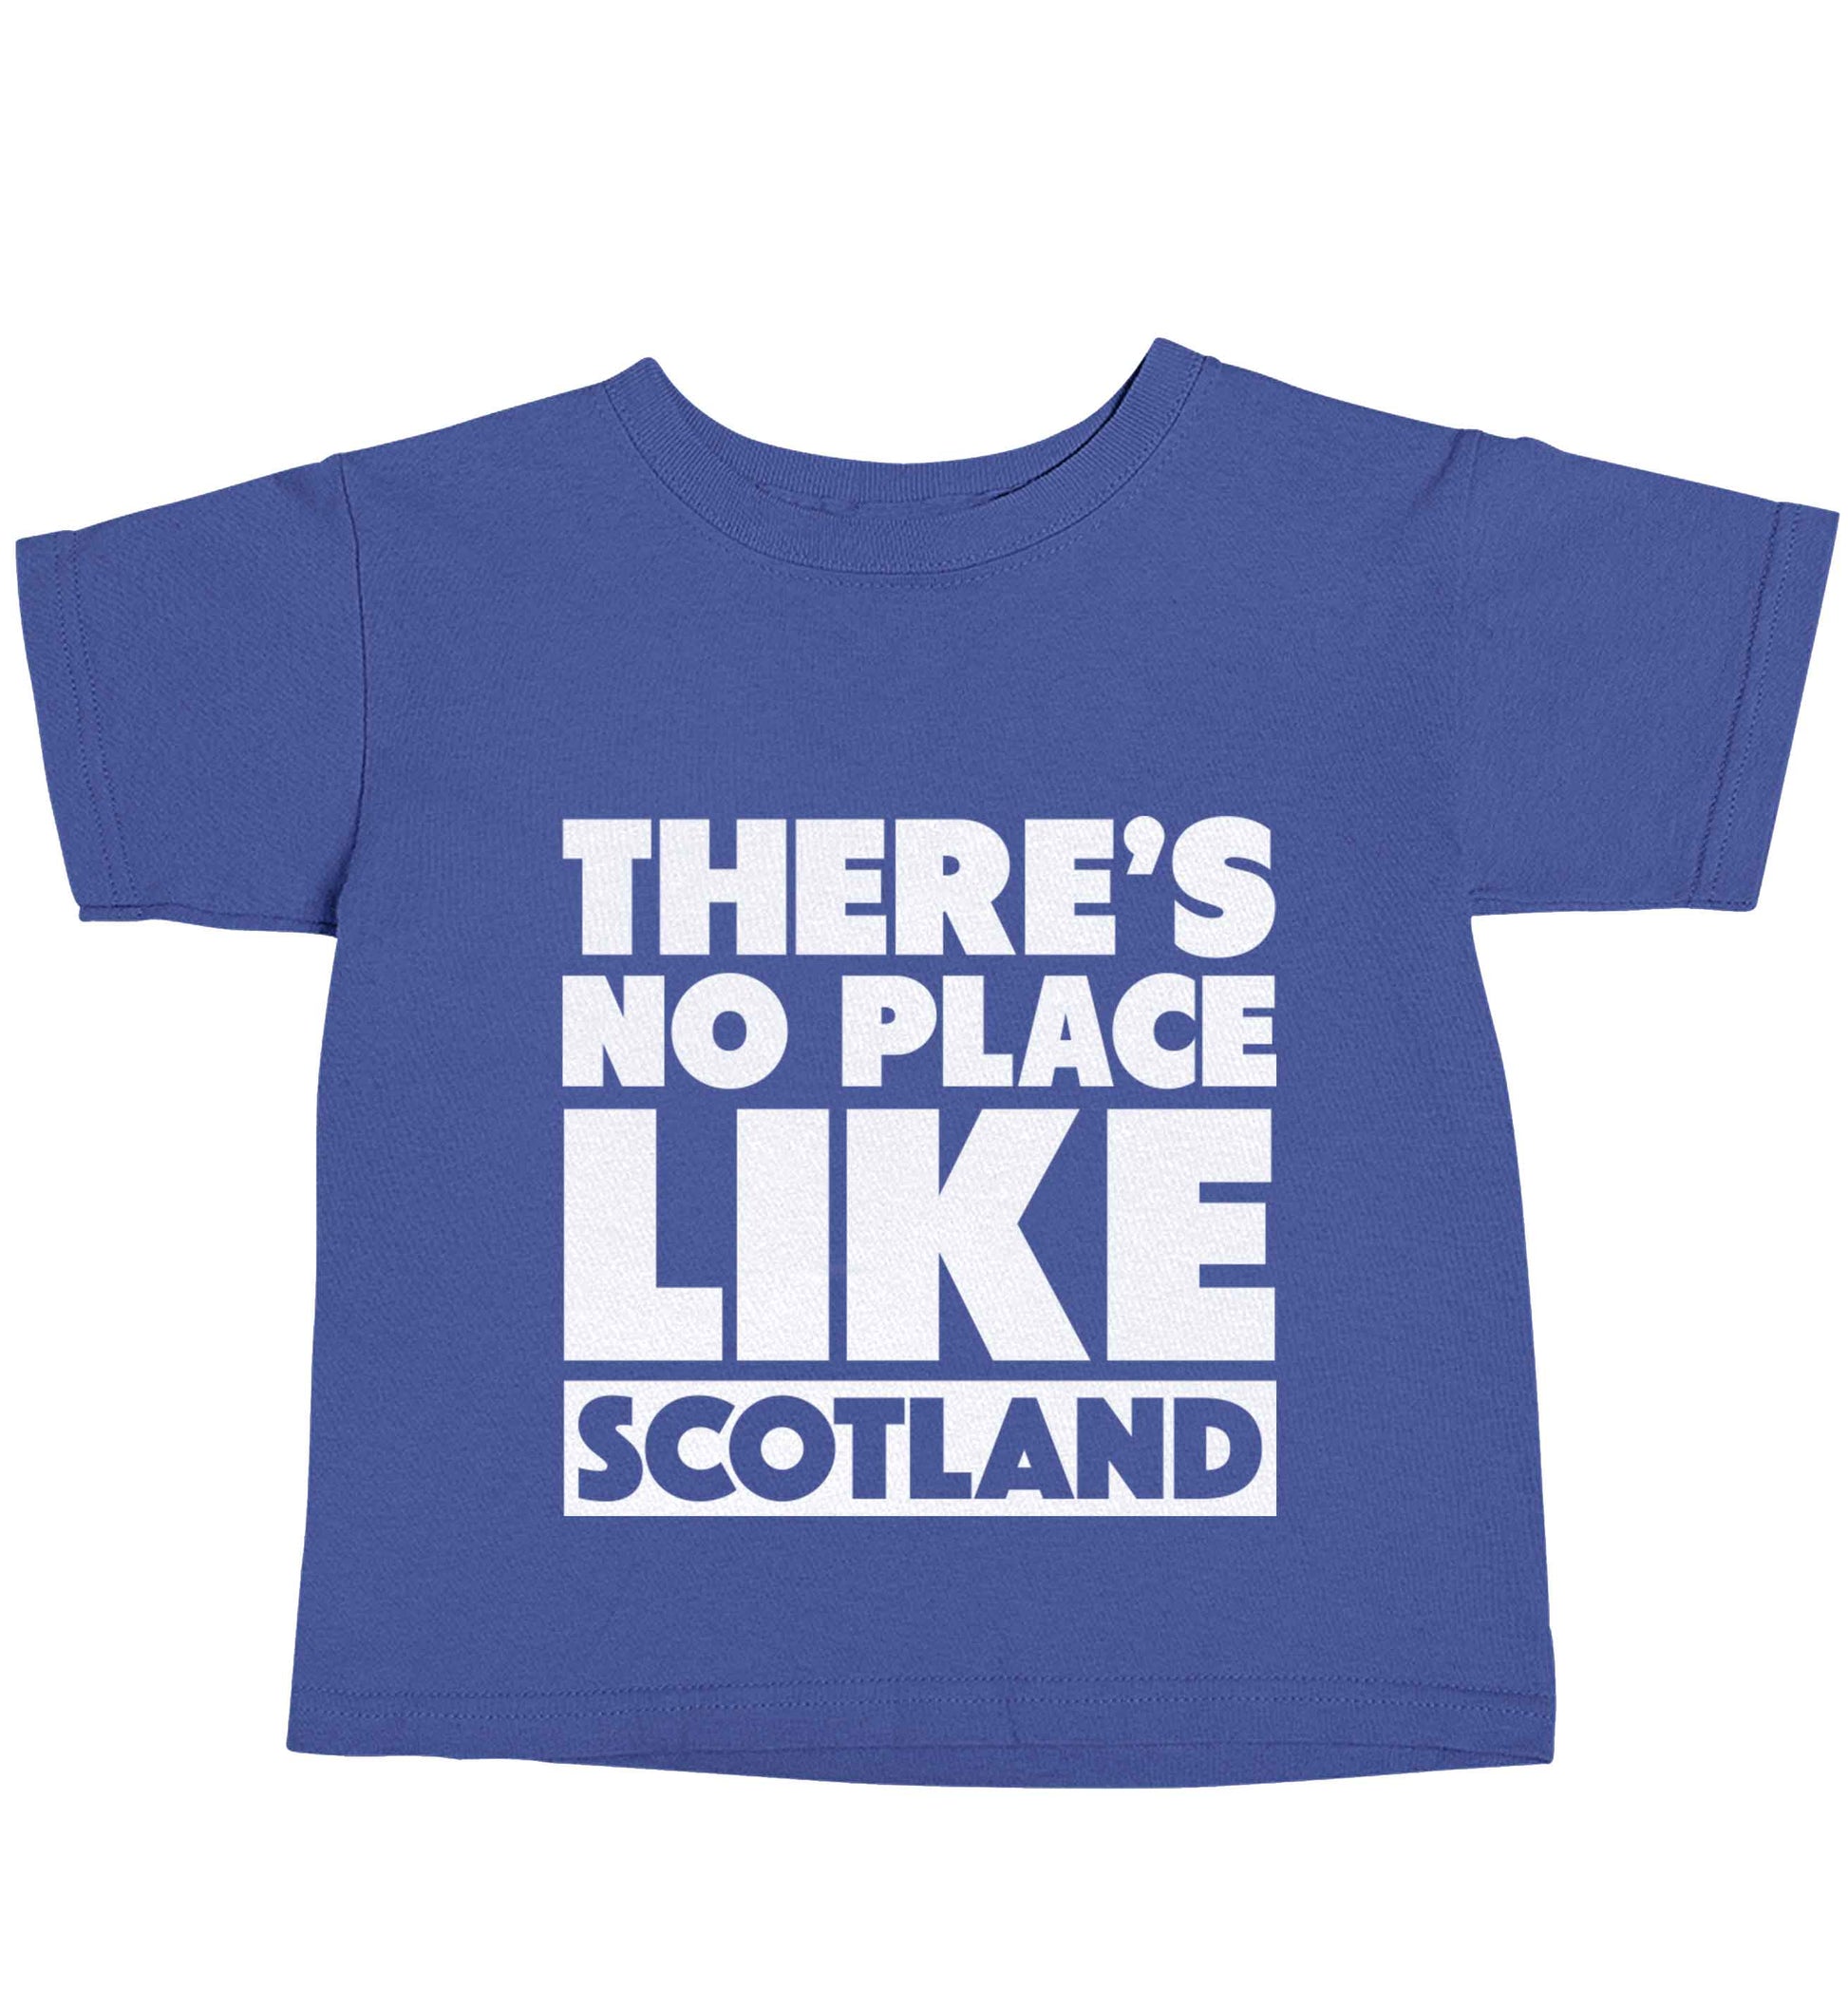 There's no place like Scotland blue baby toddler Tshirt 2 Years